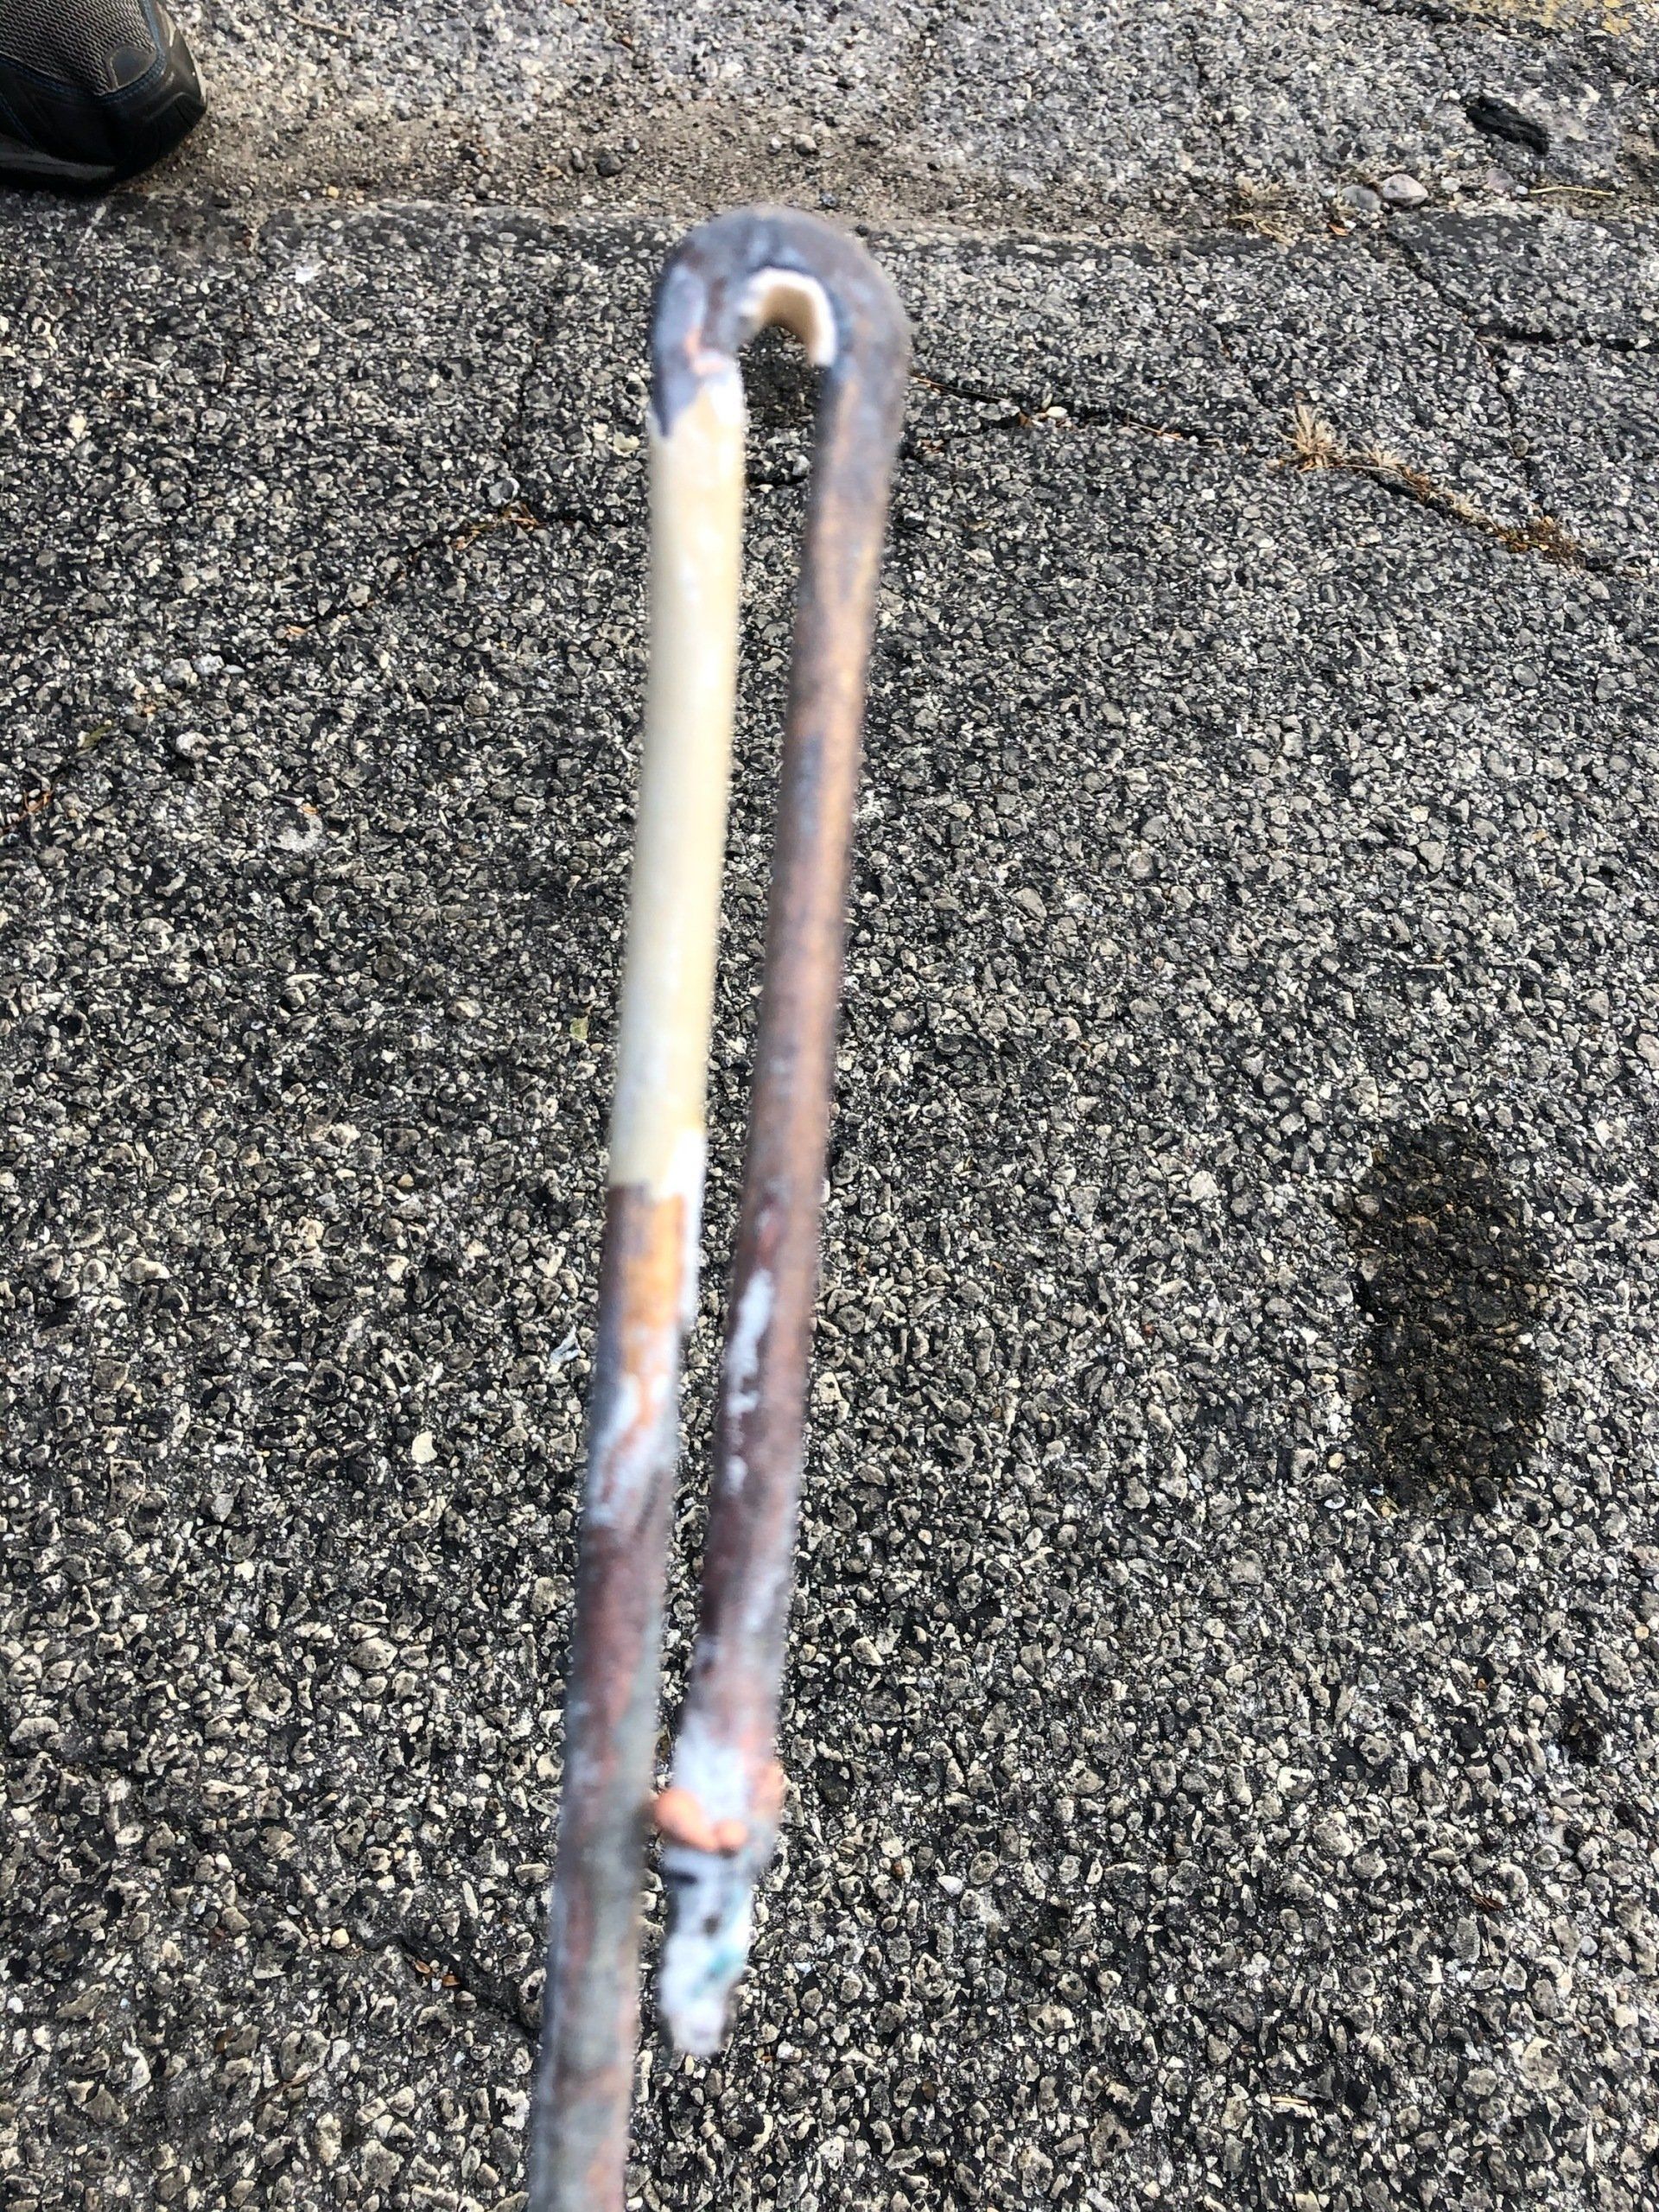 corroded copper water heater element with some sediment build-up